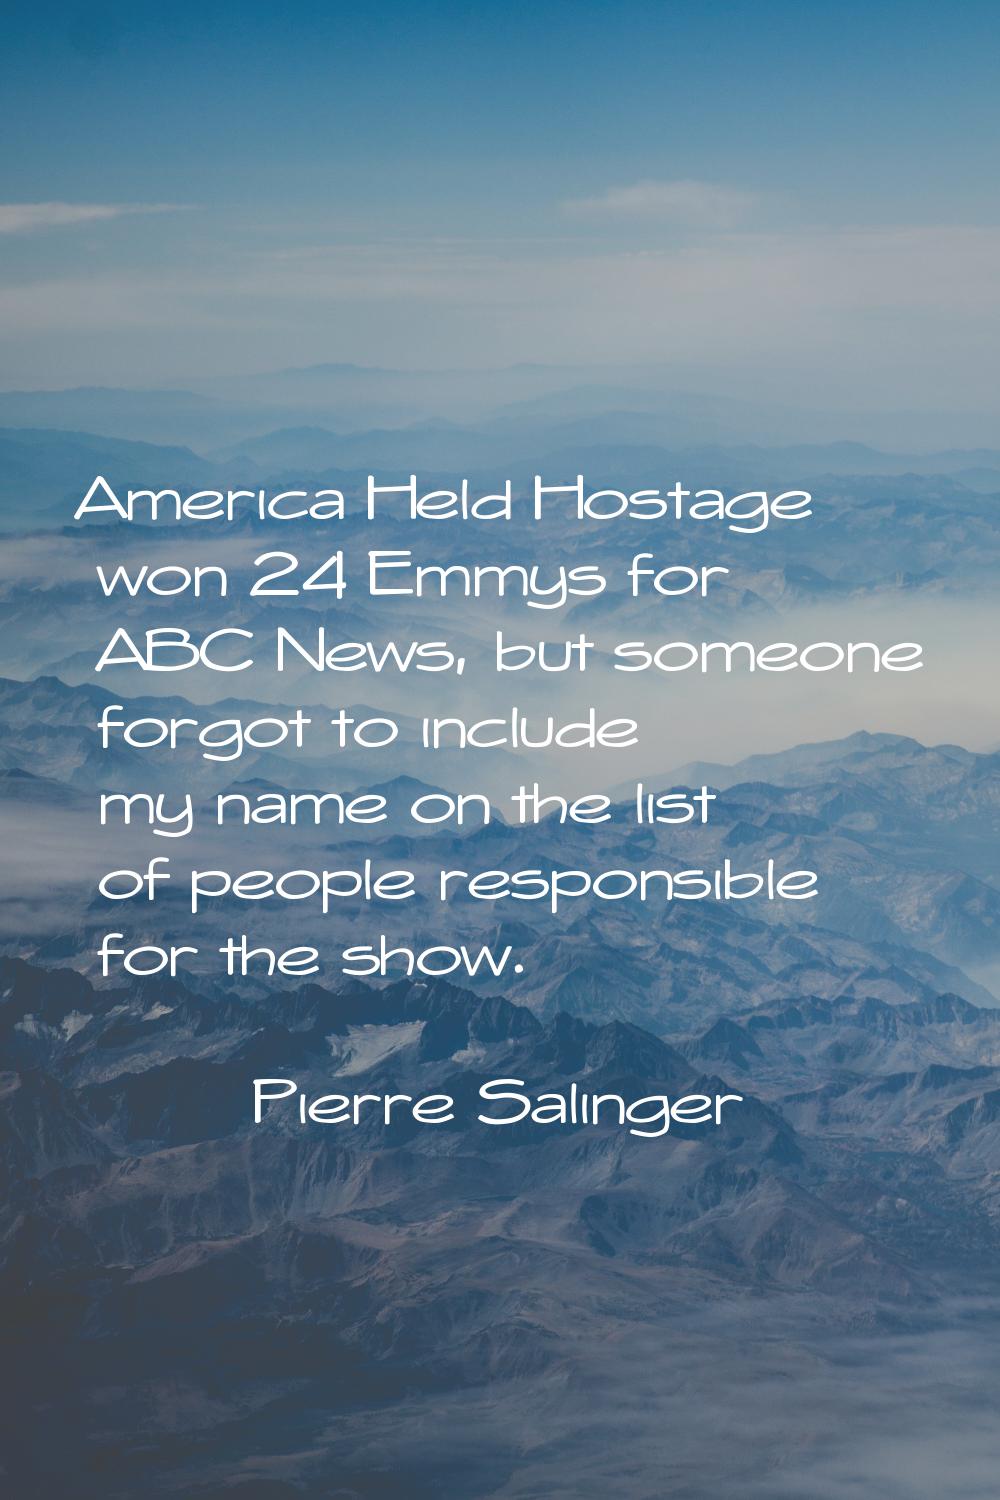 America Held Hostage won 24 Emmys for ABC News, but someone forgot to include my name on the list o